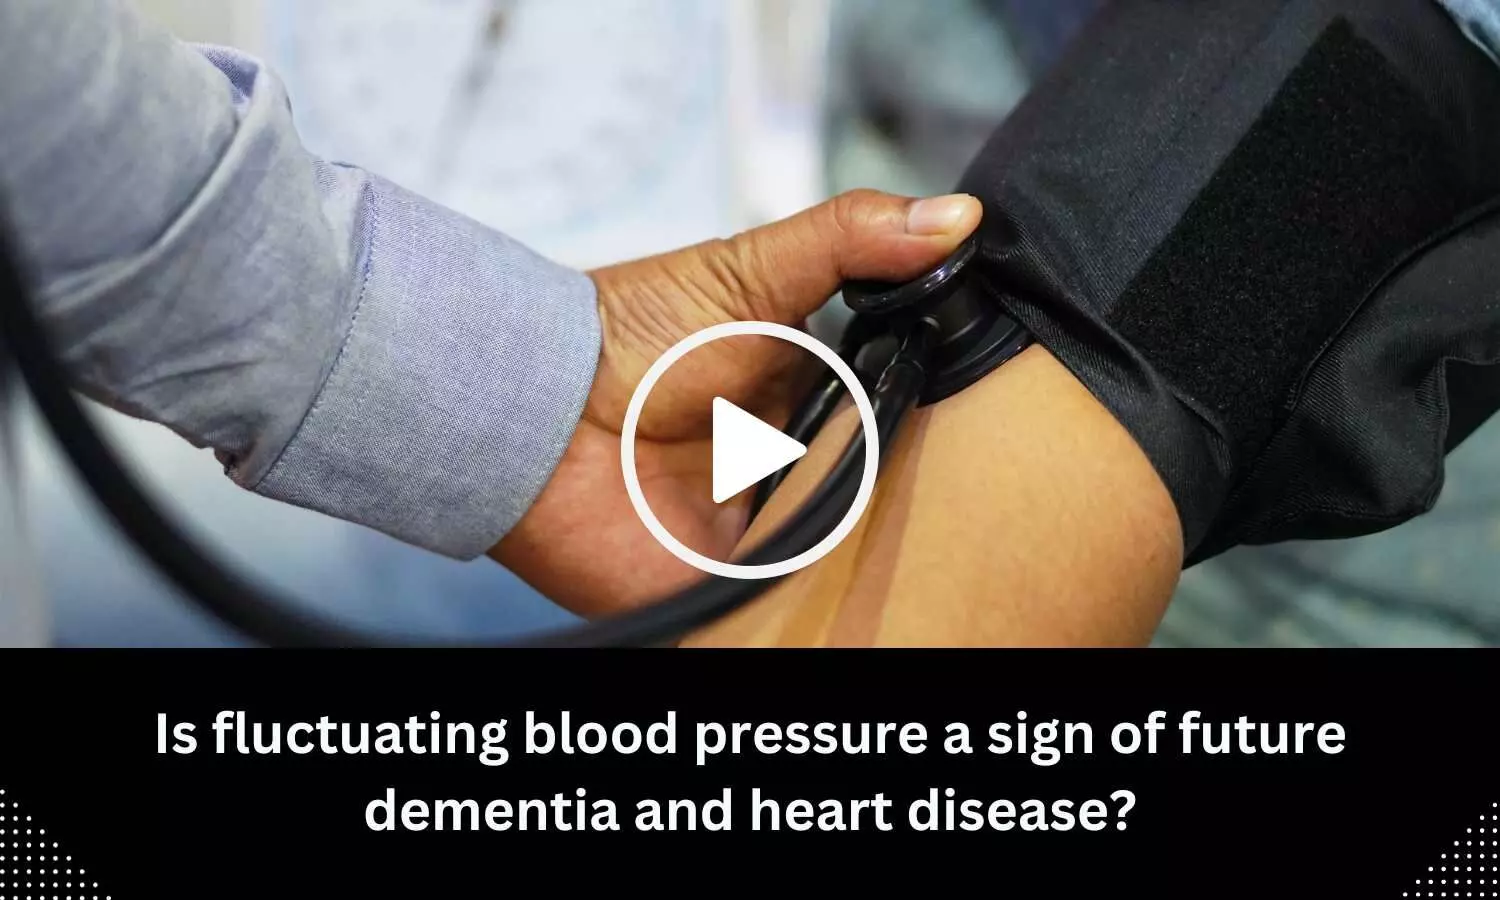 Is fluctuating blood pressure a sign of future dementia and heart disease?